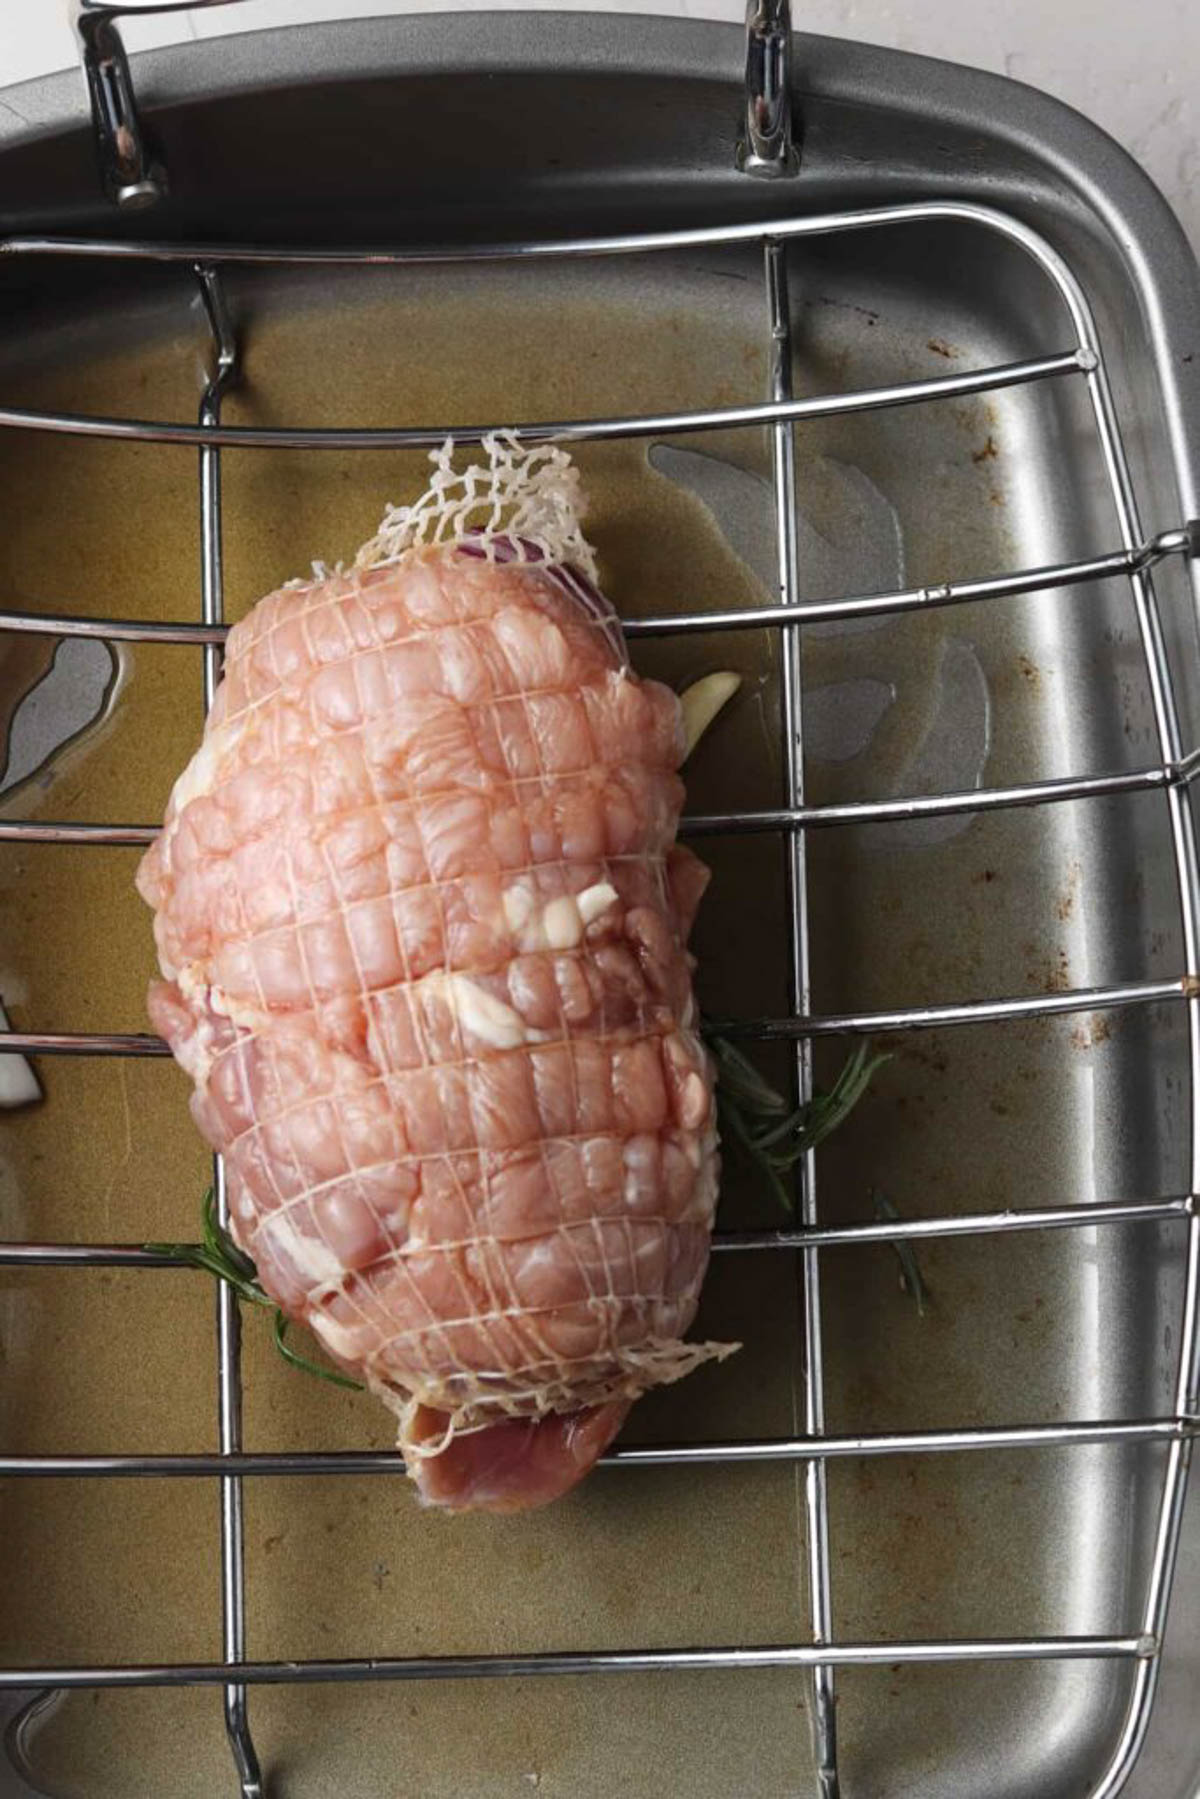 Partially roasted turkey breast in a roasting pan.